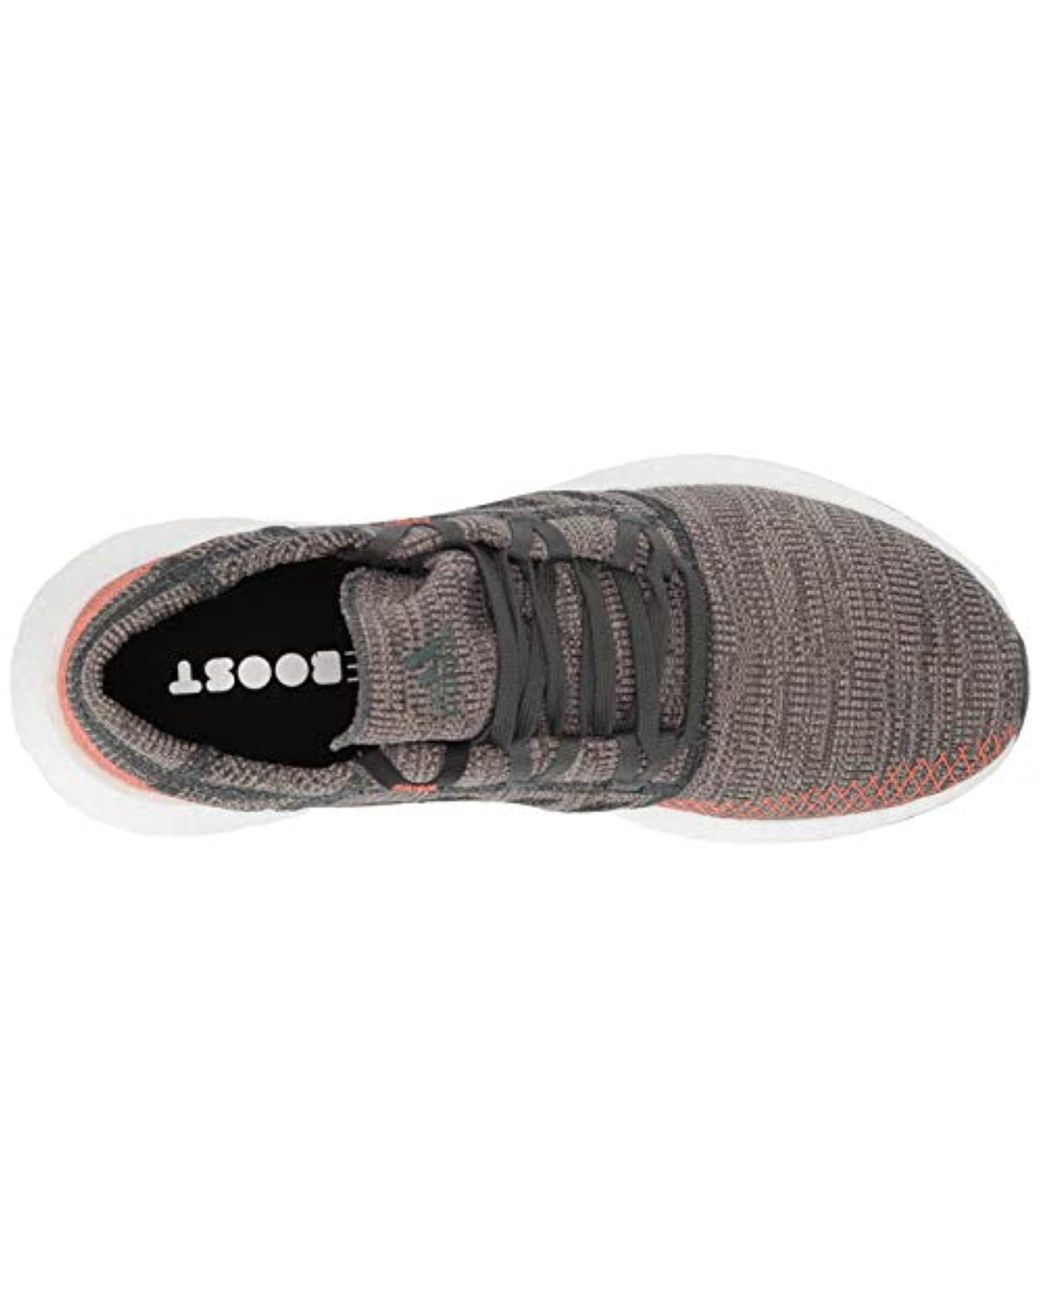 adidas D97421 Pureboost Go Running Shoes Boost Sole in Black for Men | Lyst